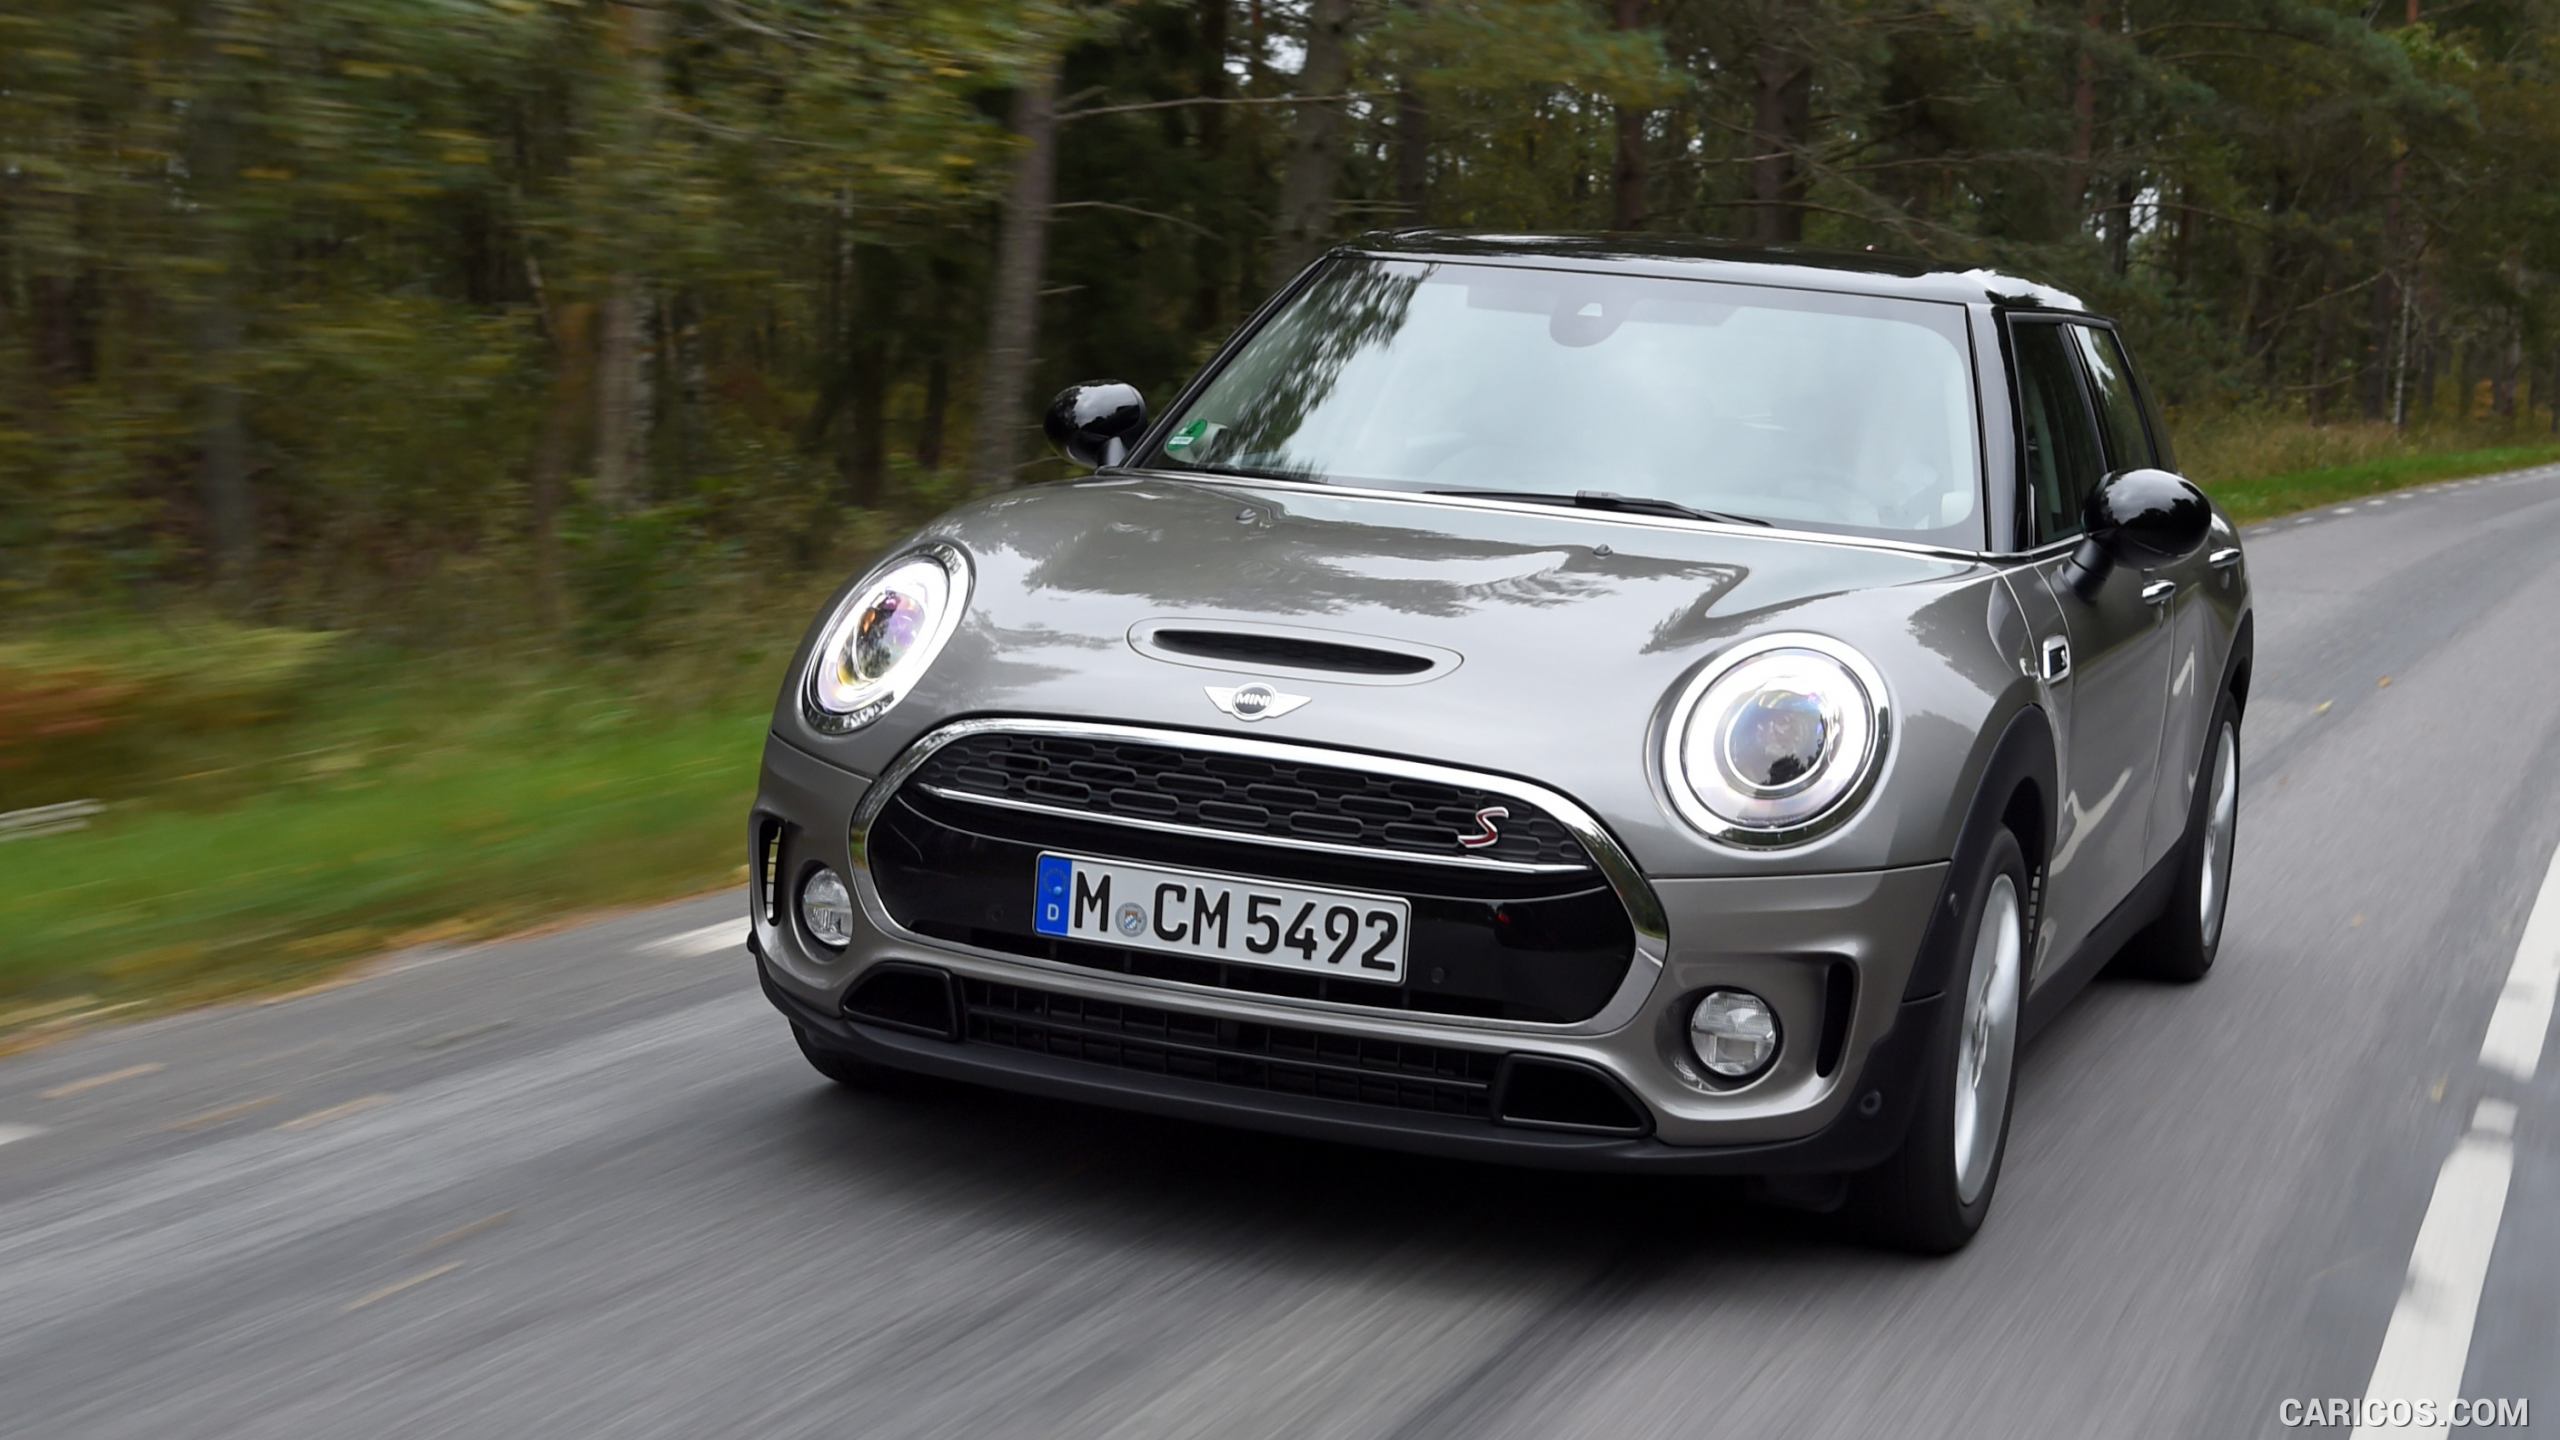 2016 MINI Cooper S Clubman in Metallic Melting Silver - Front, #123 of 380